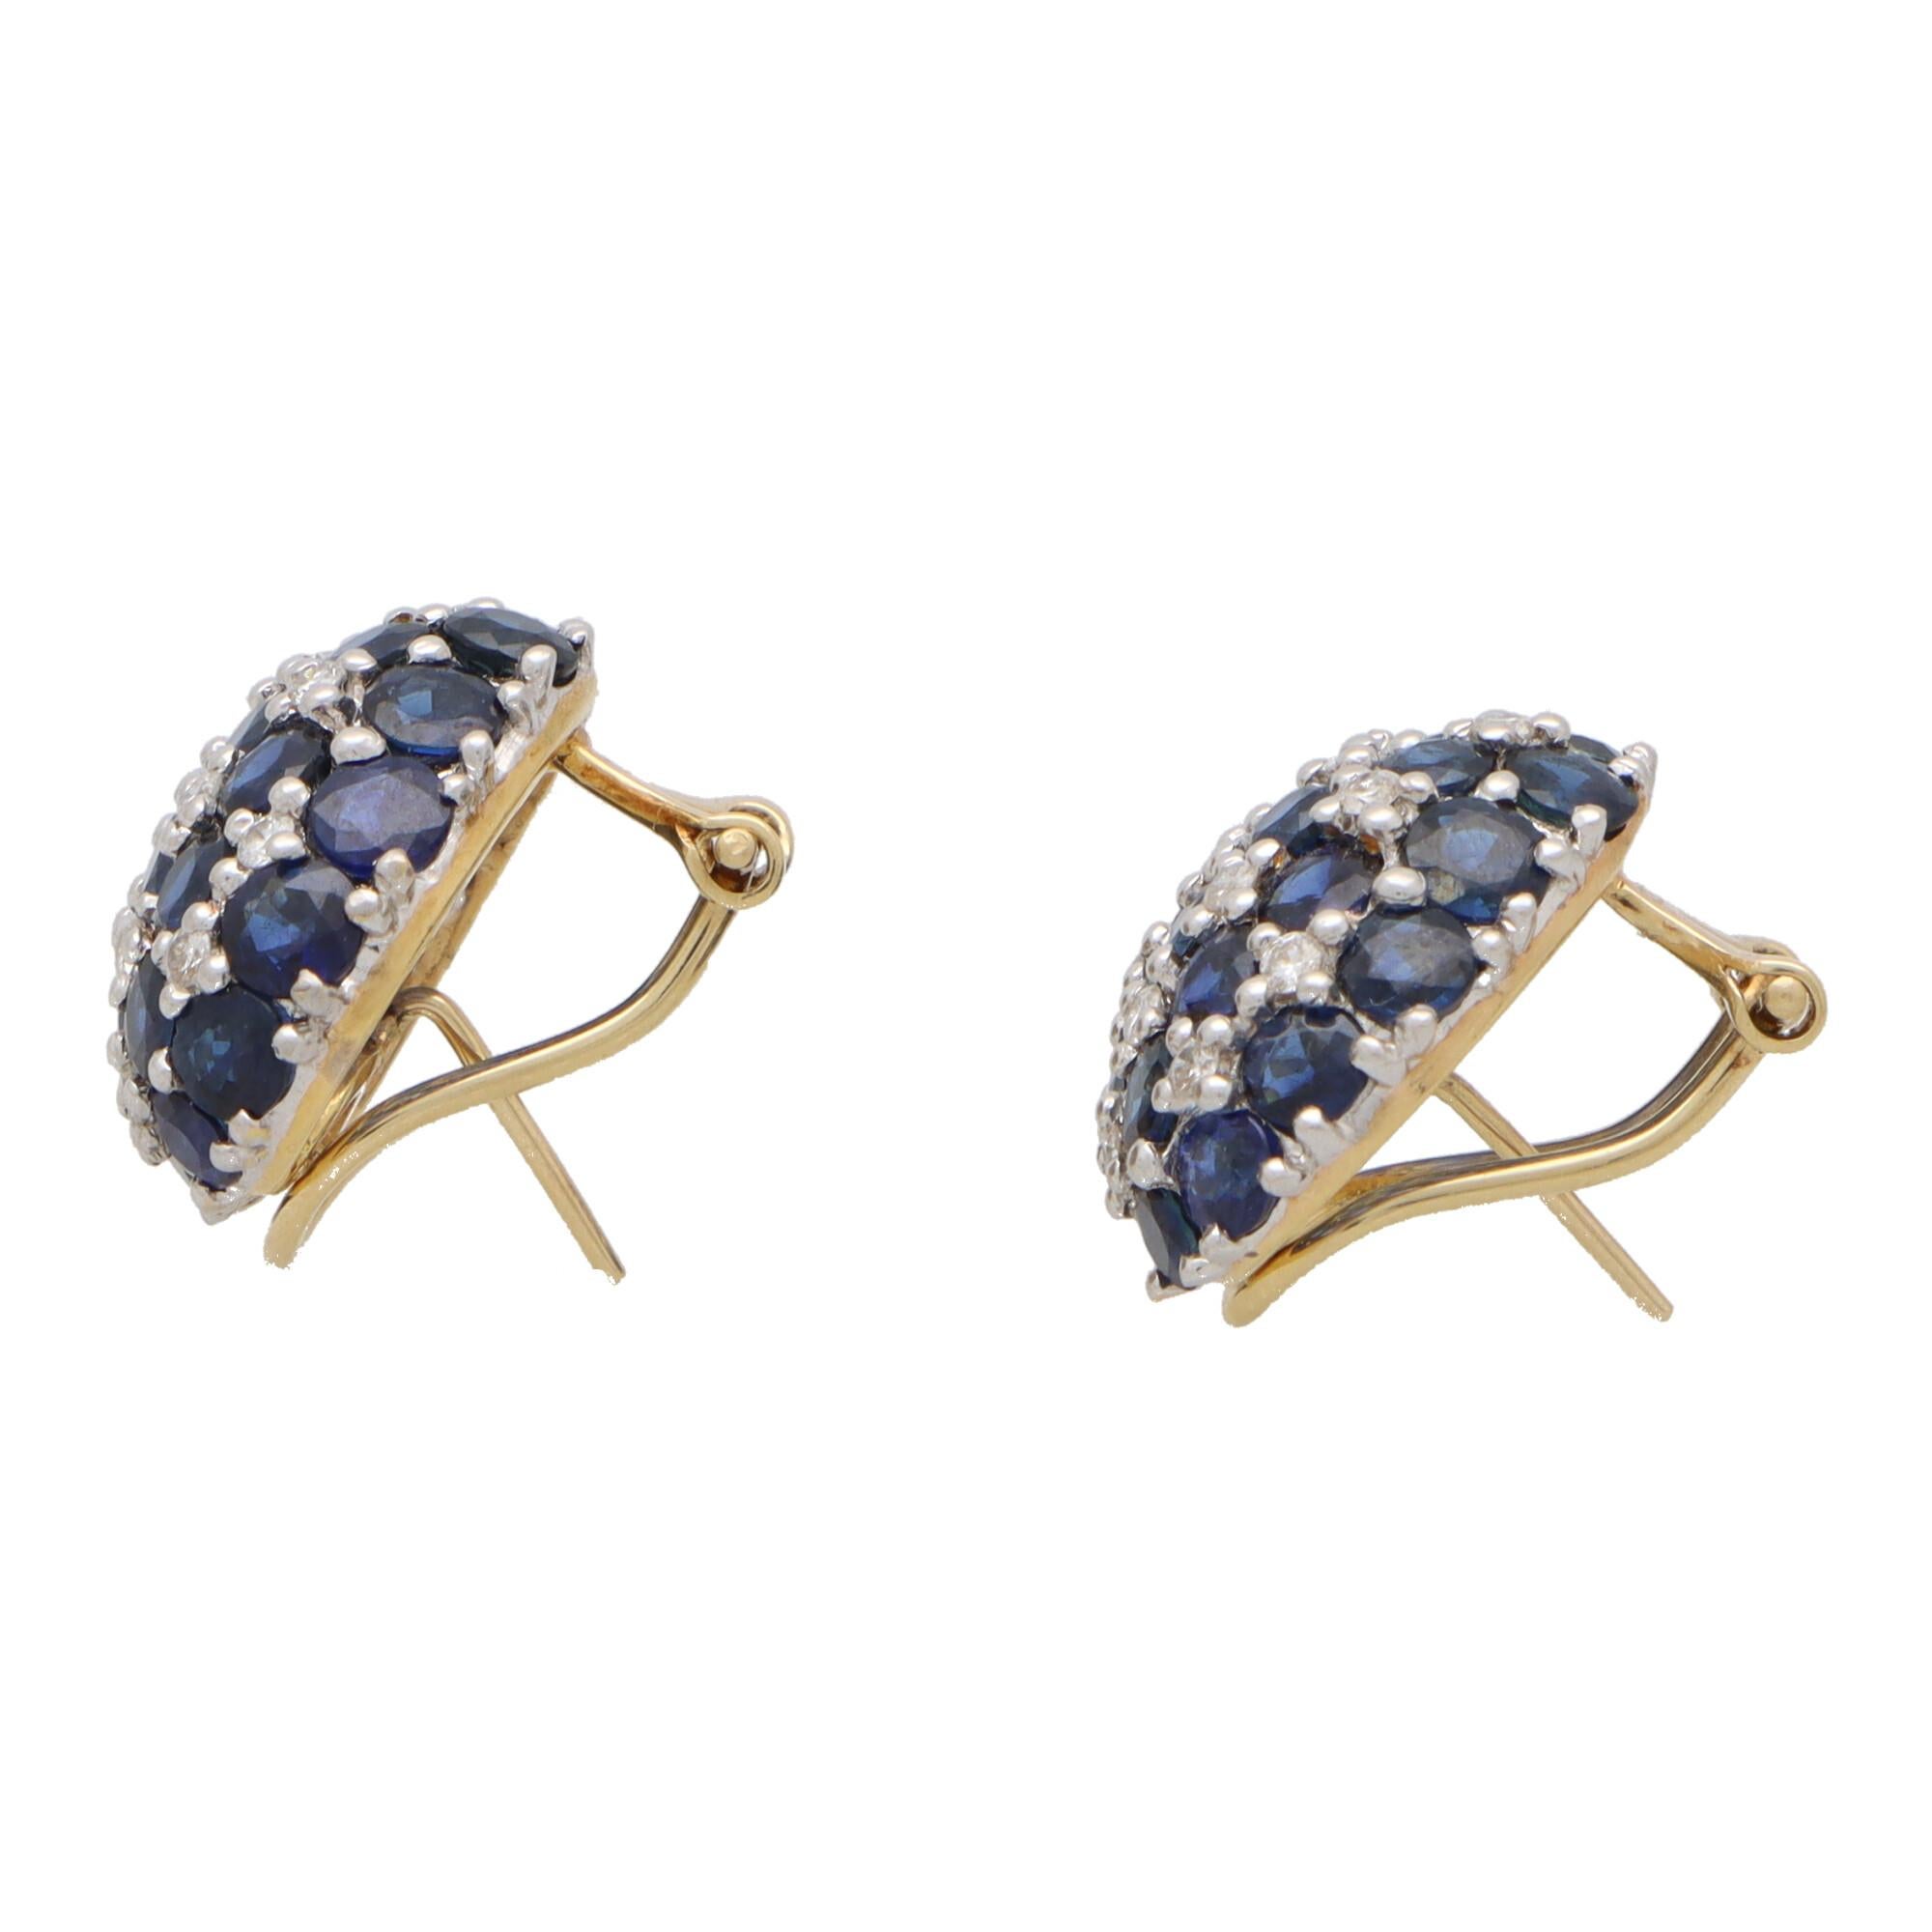 Round Cut  Vintage Heart Shaped Sapphire and Diamond Earrings